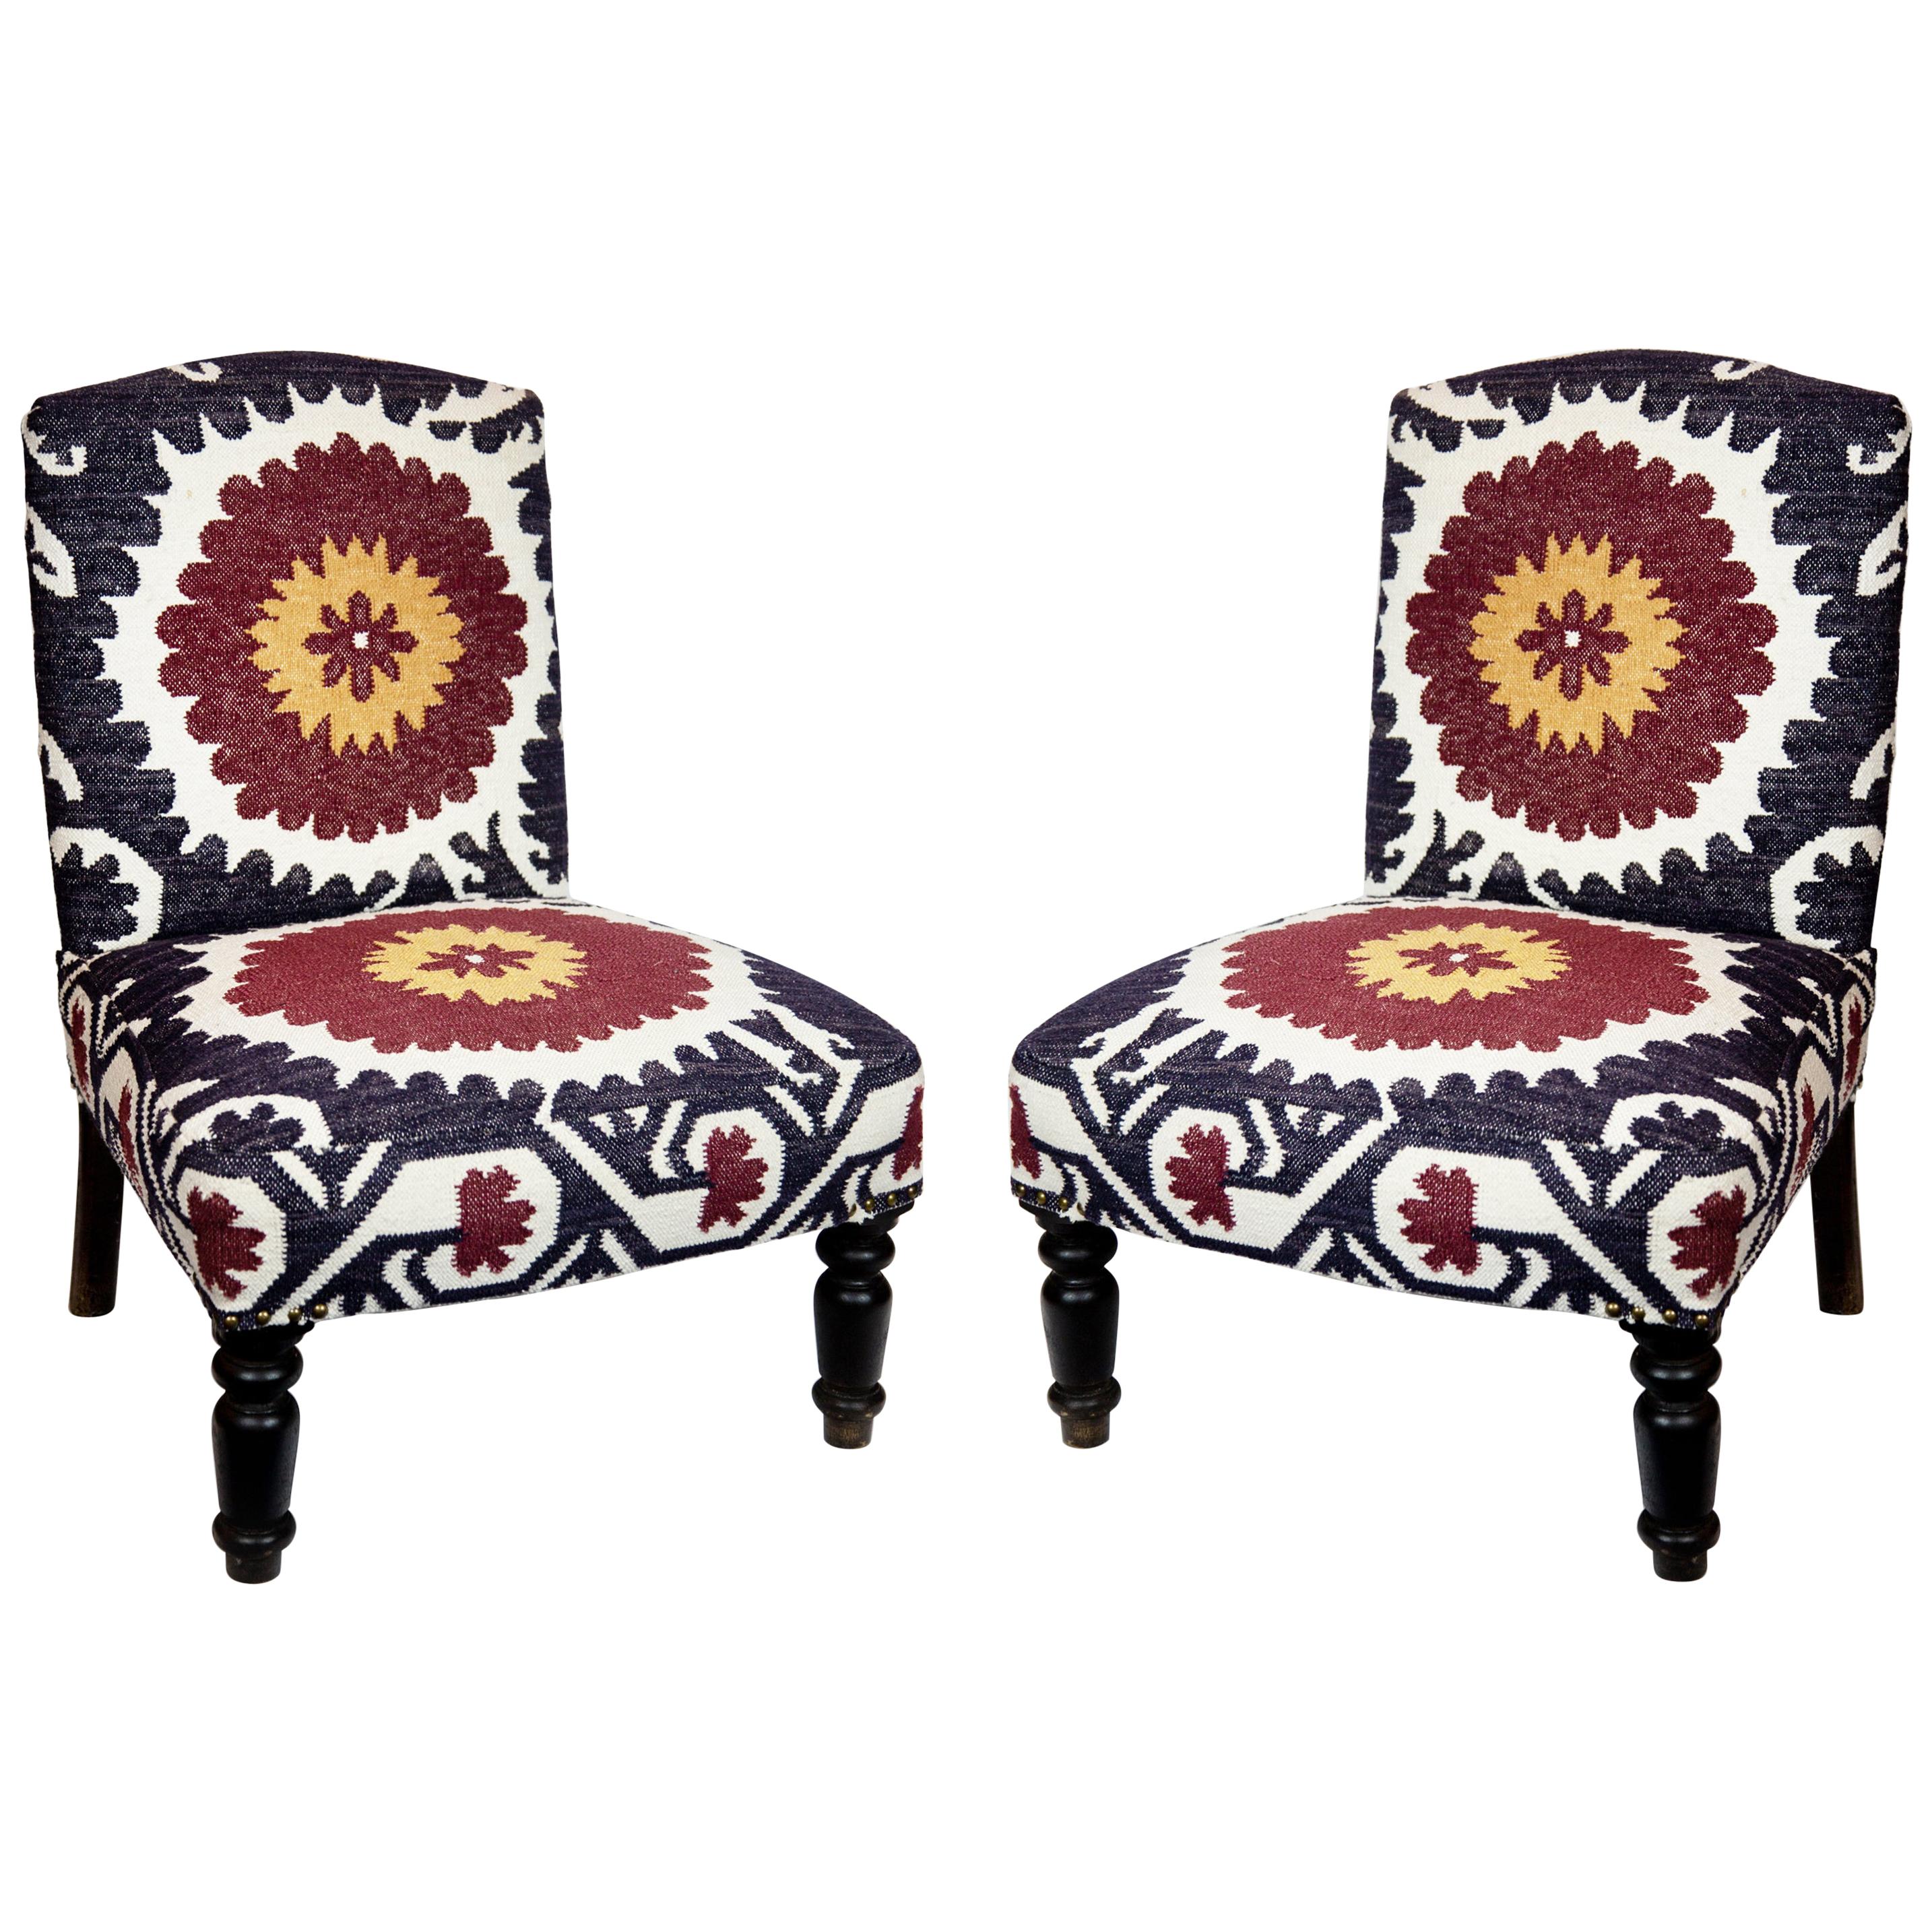 Pair of Suzani Design Upholstered Chairs